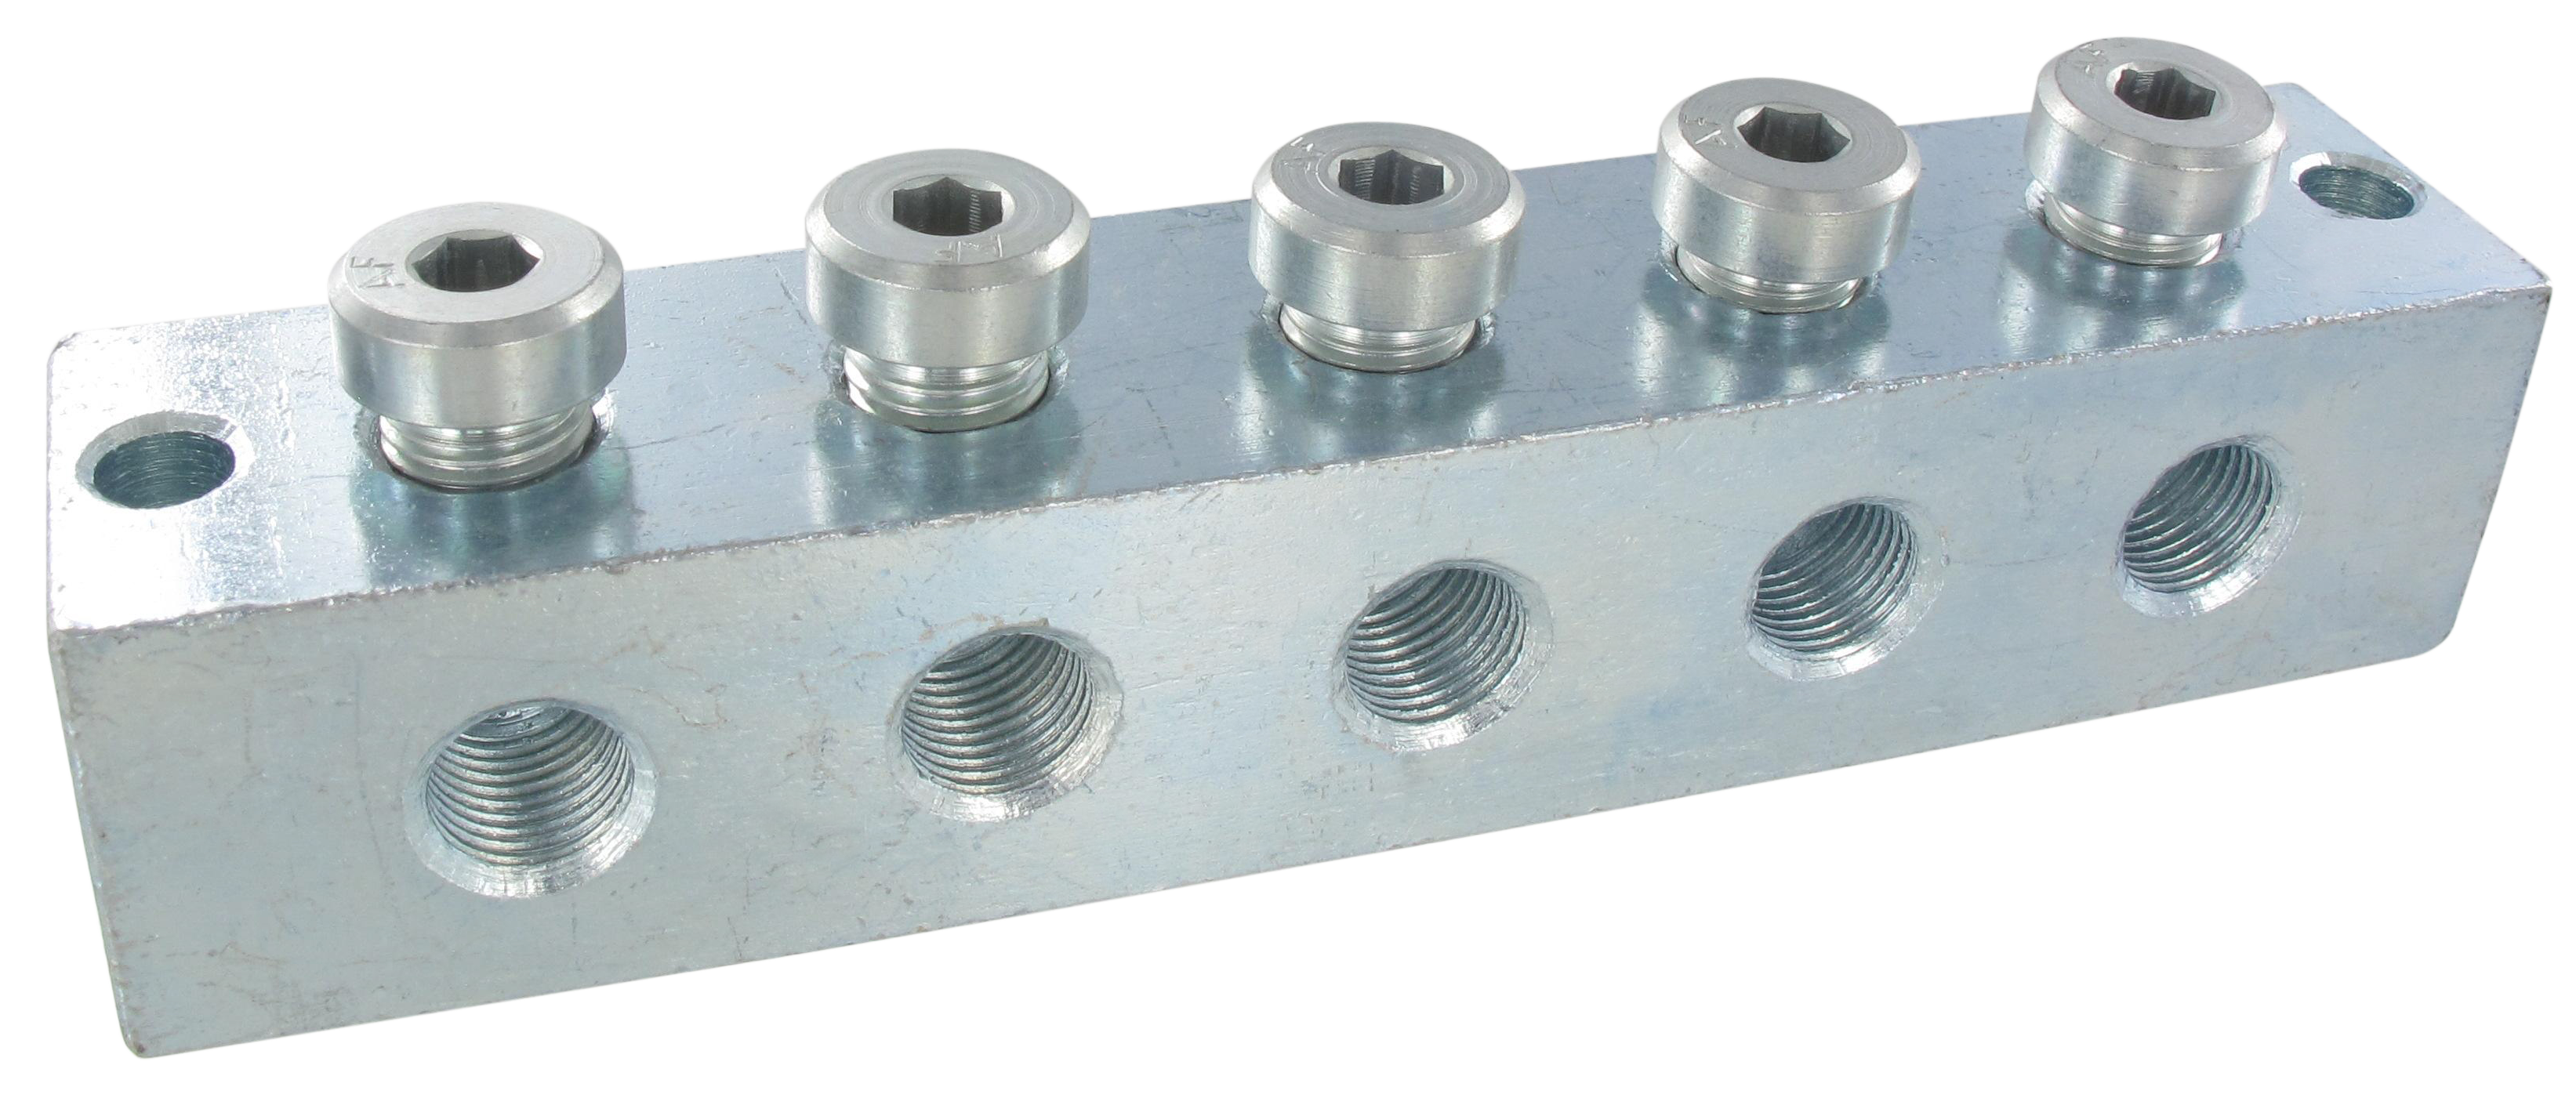 Threaded T-connector manifolds M10x1 in galvanised steel Standard fittings for lubrication